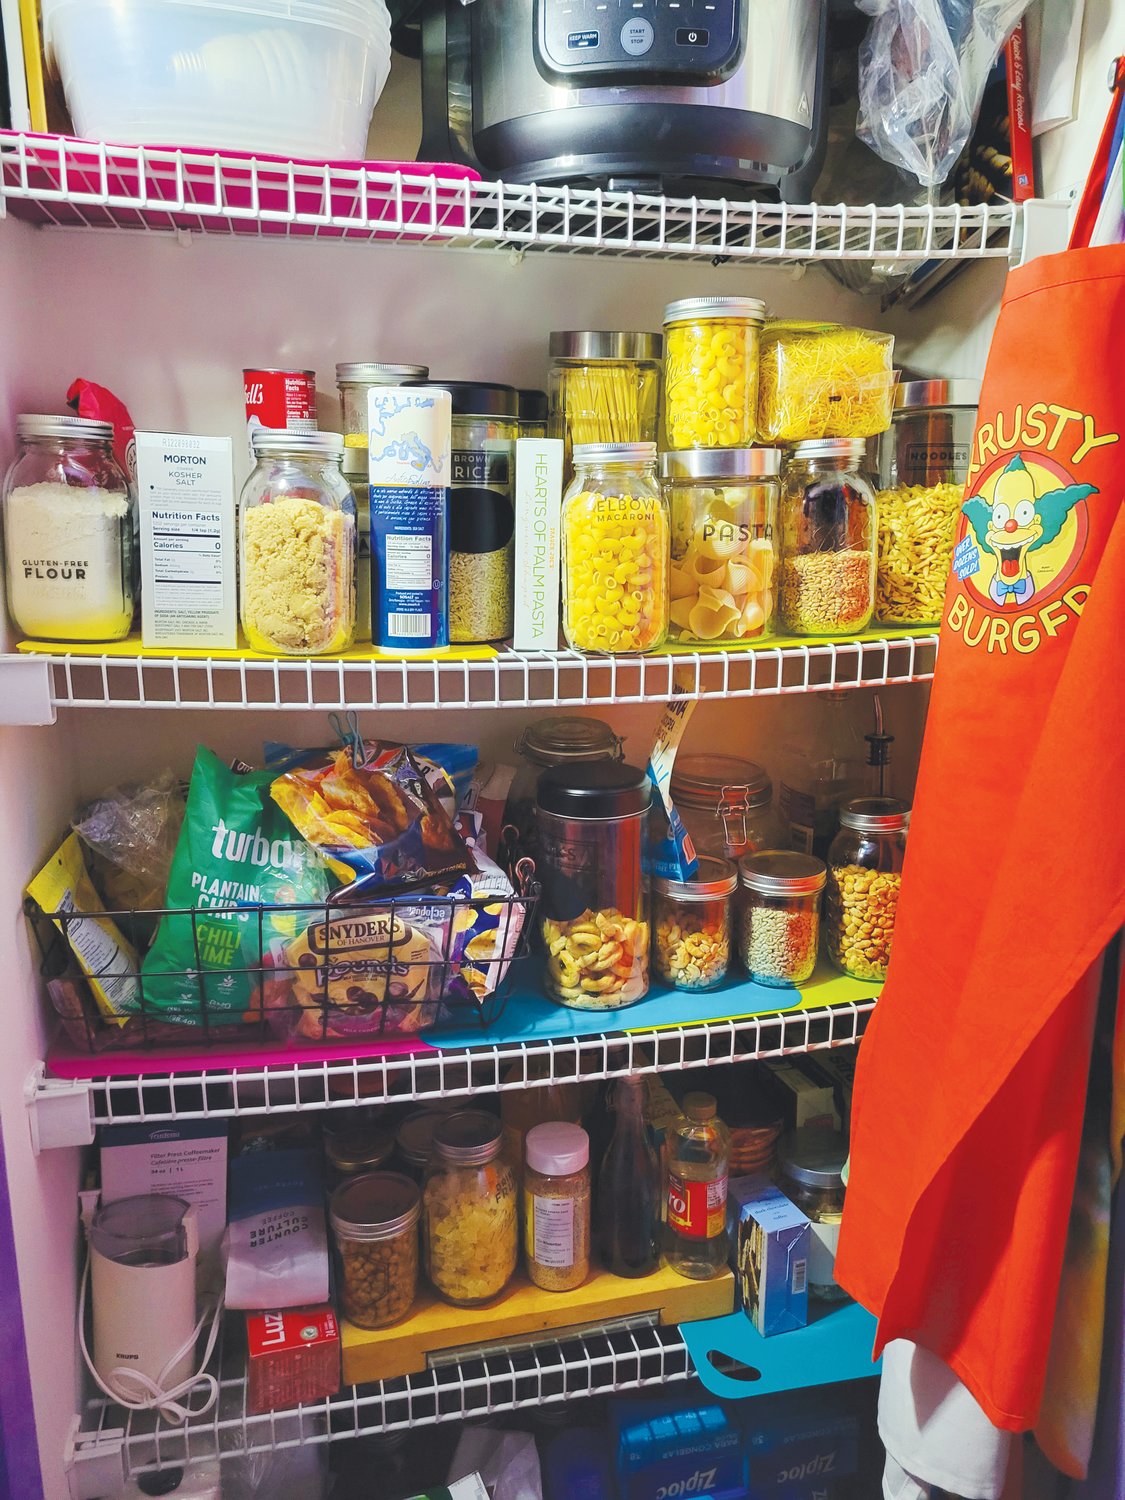 The Curious Cook's pantry.